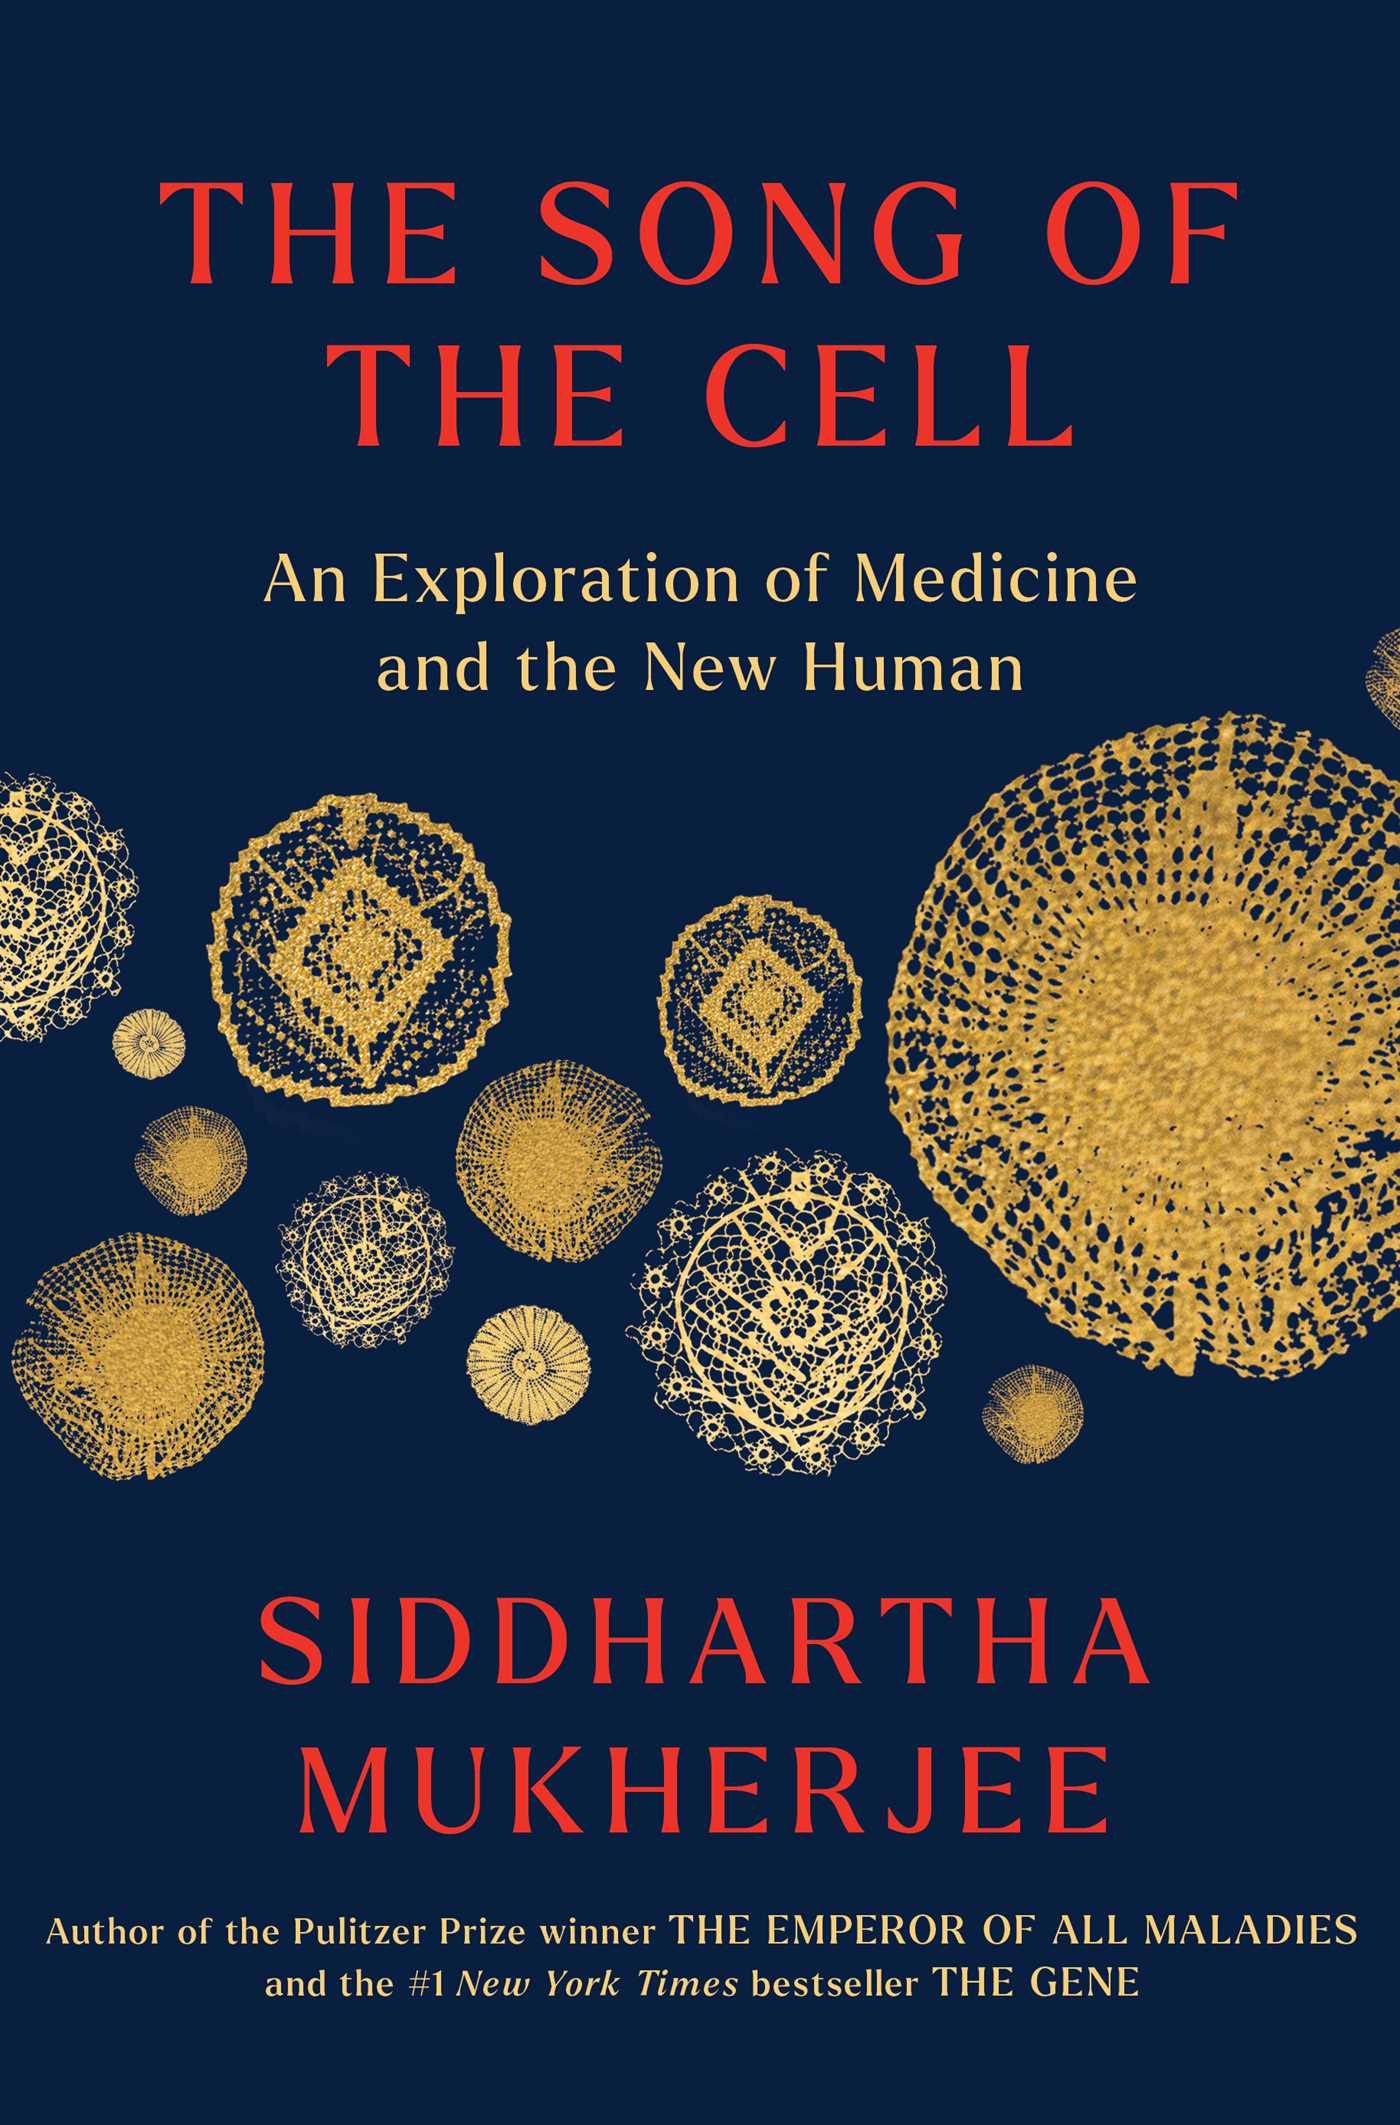 The Song of the Cell book cover image